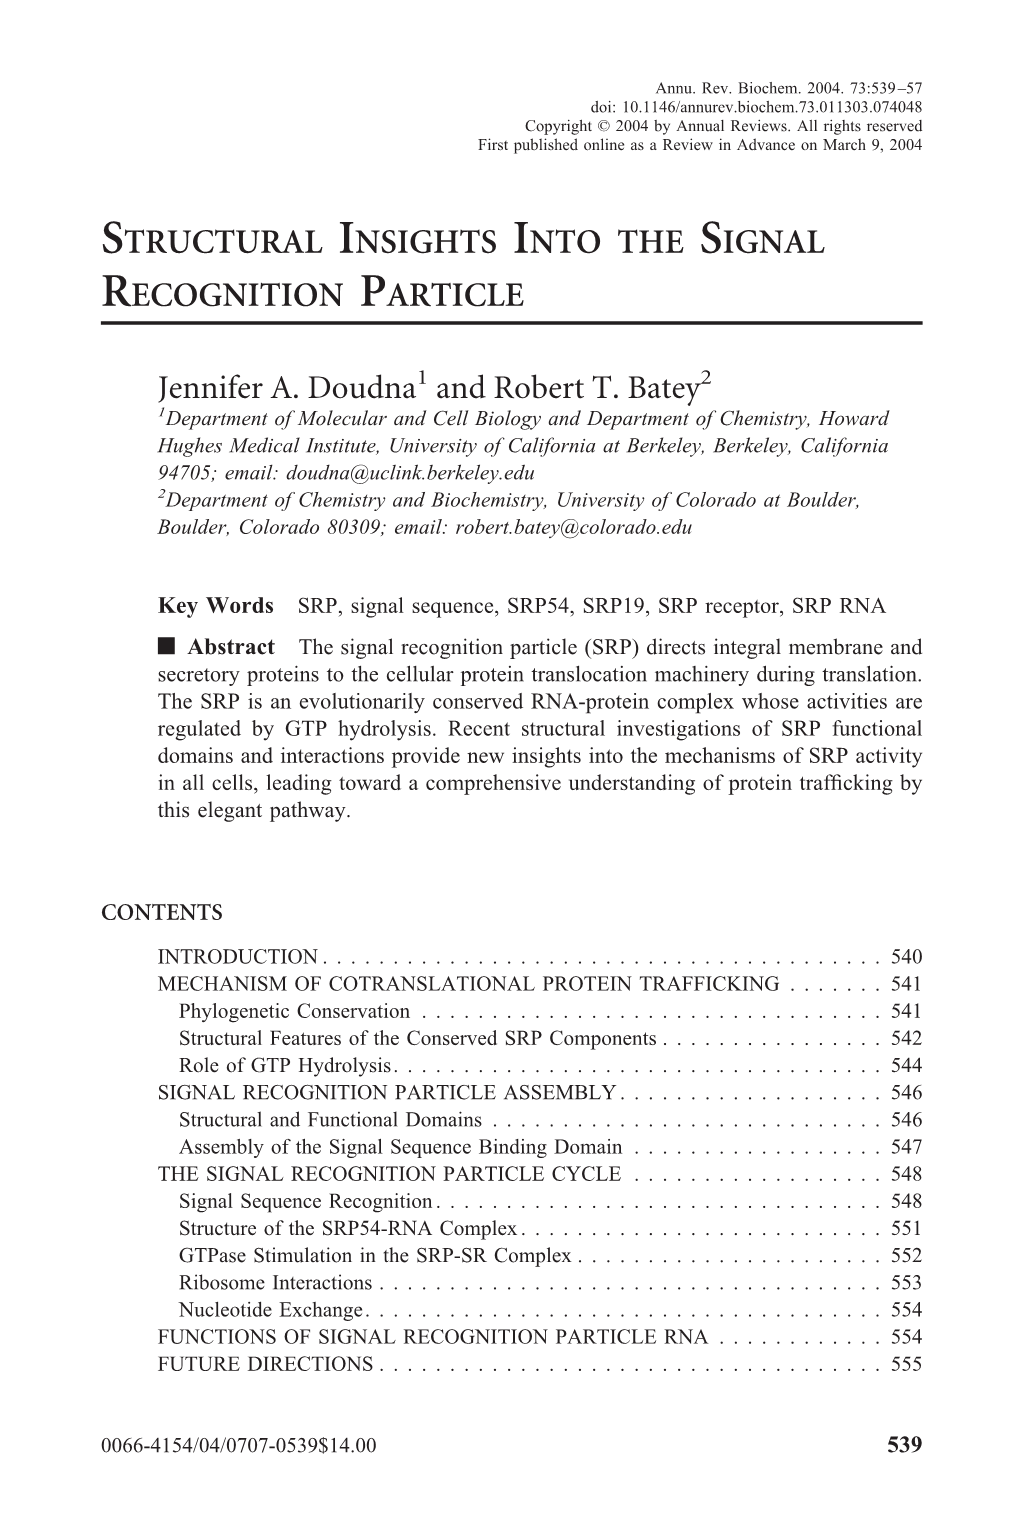 Structural Insights Into the Signal Recognition Particle